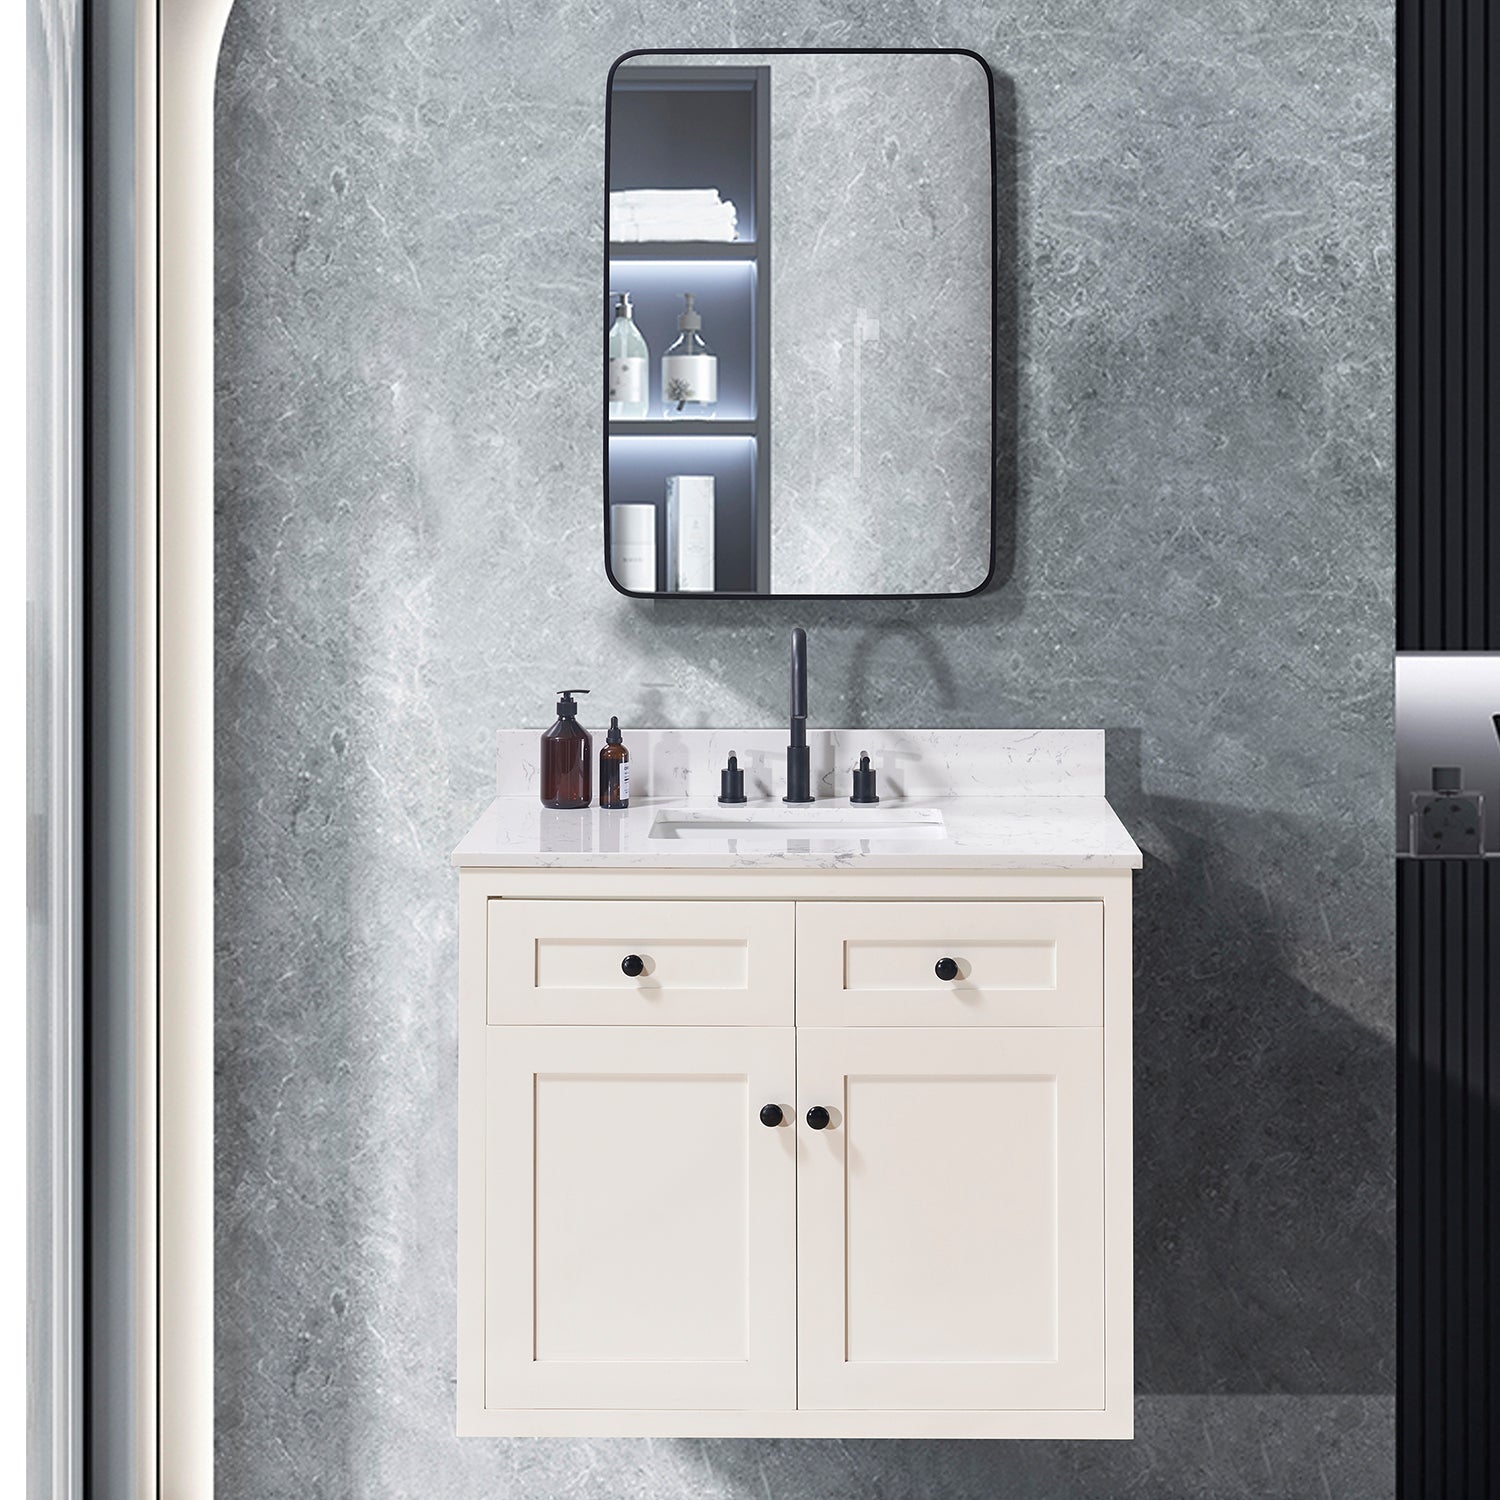 Trento Stone effects Vanity Top in Aosta White with White Sink